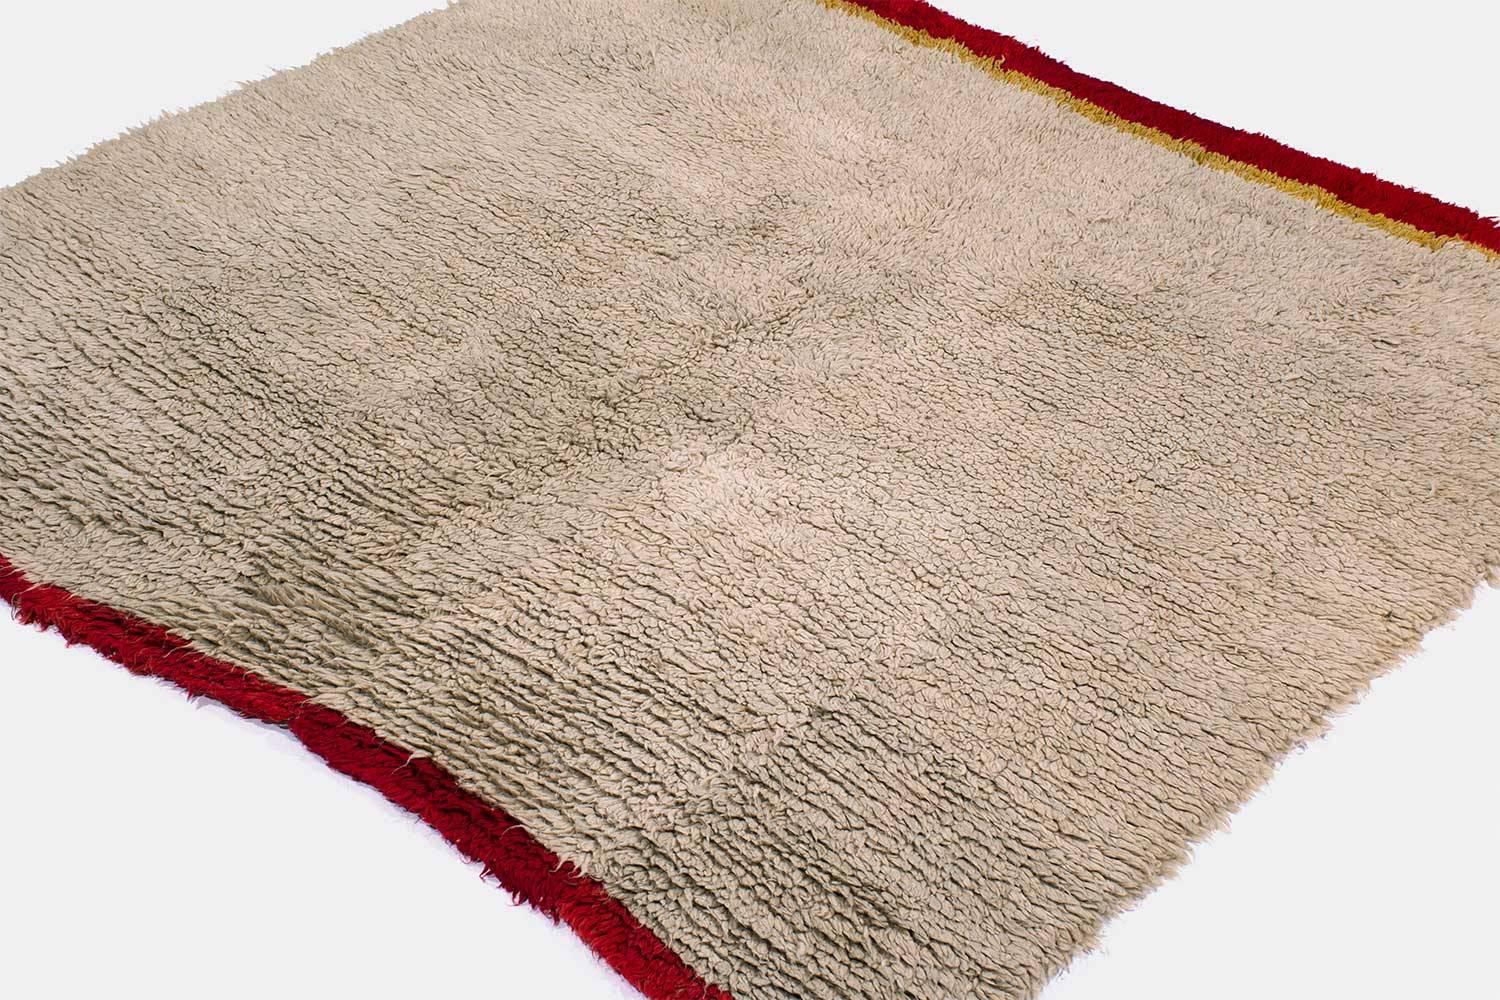 This rug can serve as either a rug or a blanket. Woven by nomads high up on the Tibetan Plateau, it was used as a blanket and a rug to be slept on. The rug is very soft and floppy like a textile. It was woven on a hand loom in small strips and